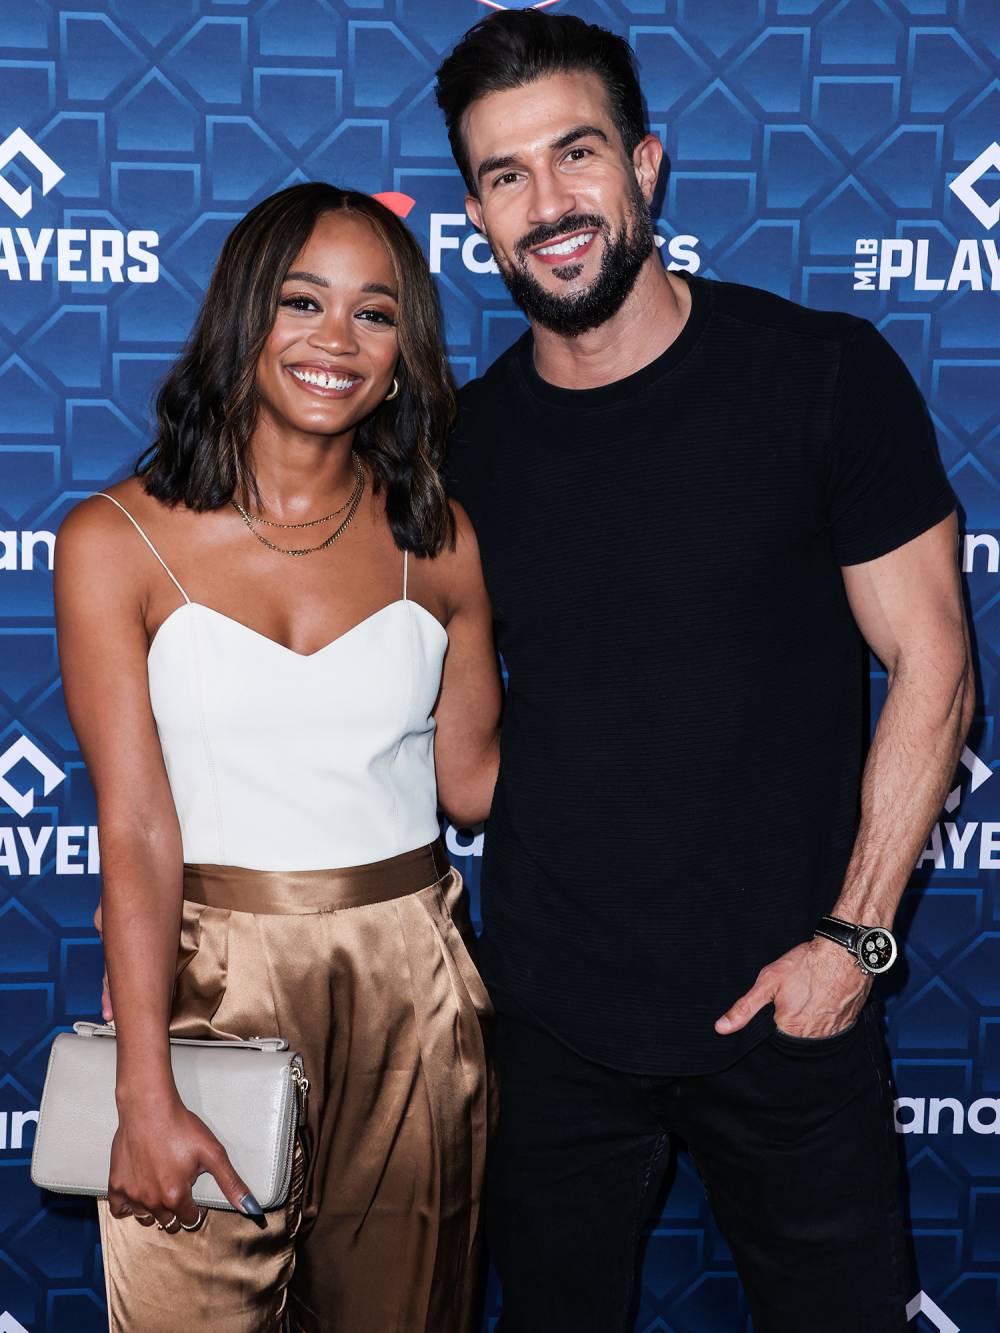 Rachel Lindsay Defends Keeping Bryan Abasolo Marriage Private Post-'Bachelorette': 'Our Contractual Public Story Ended'